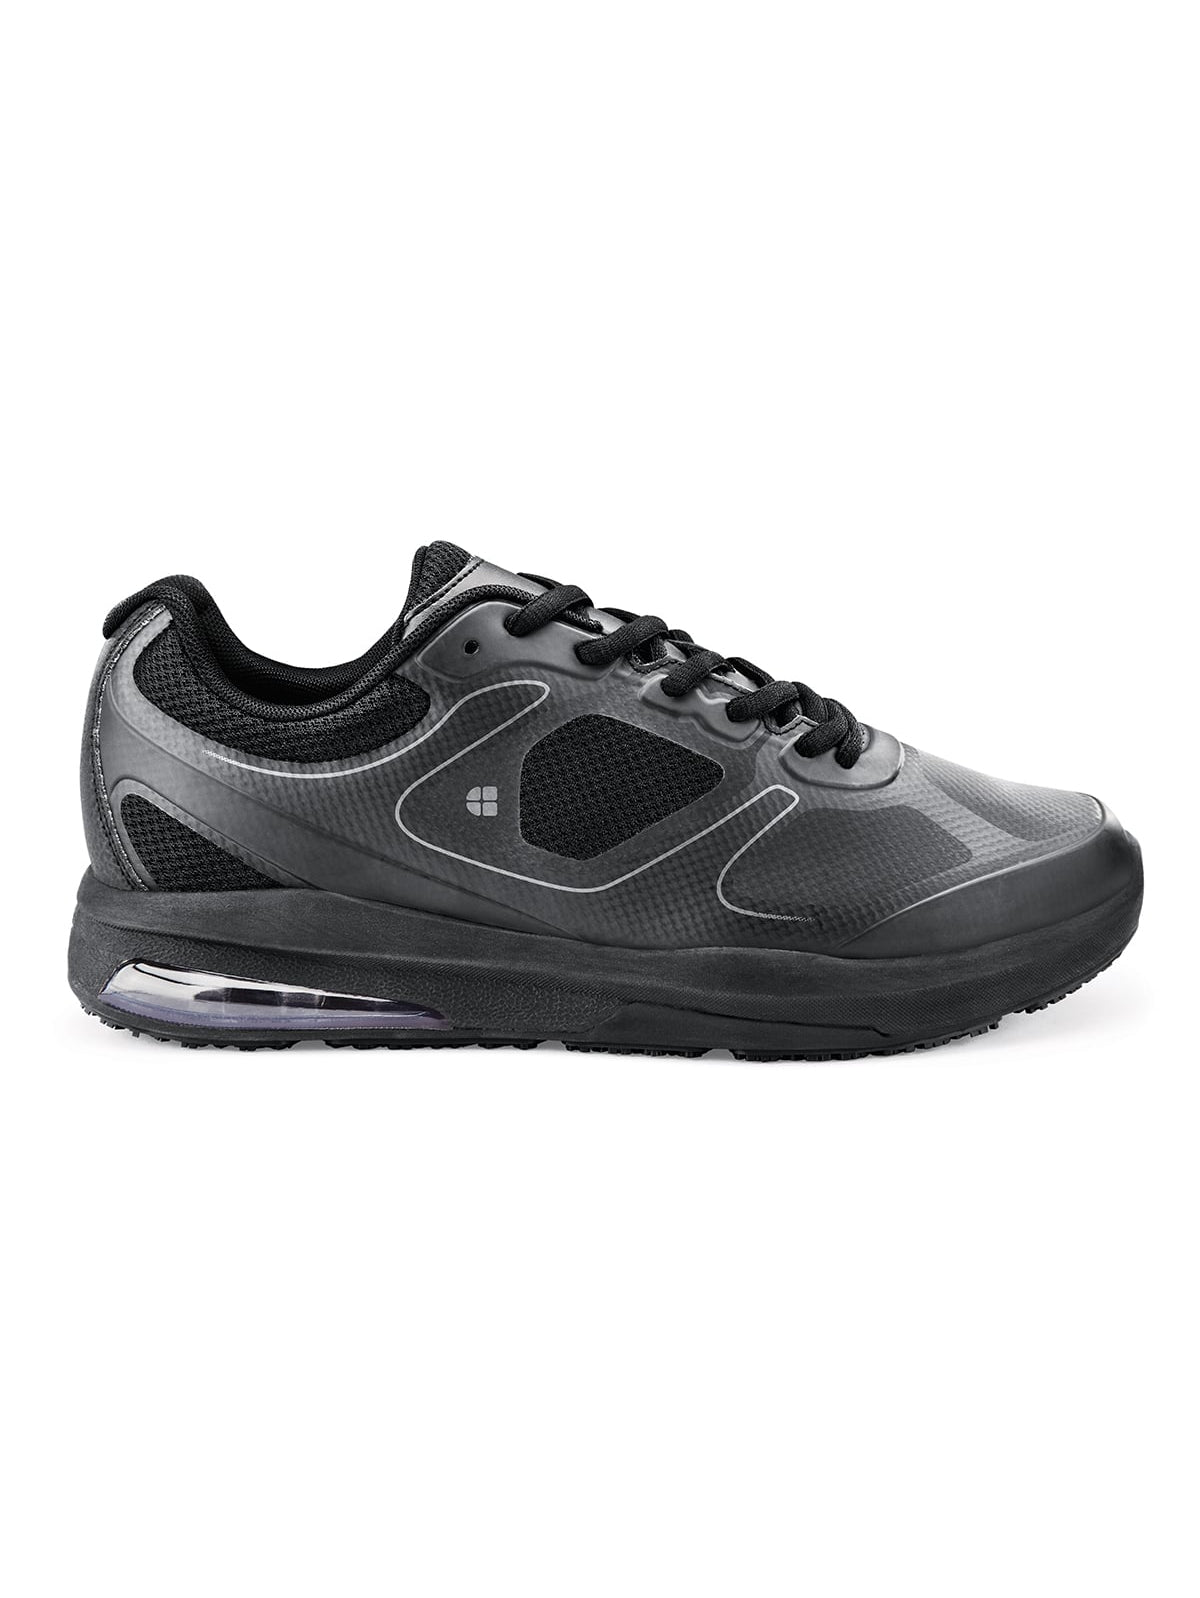 Men's Work Shoe Evolution II Black by Shoes For Crews -  ChefsCotton